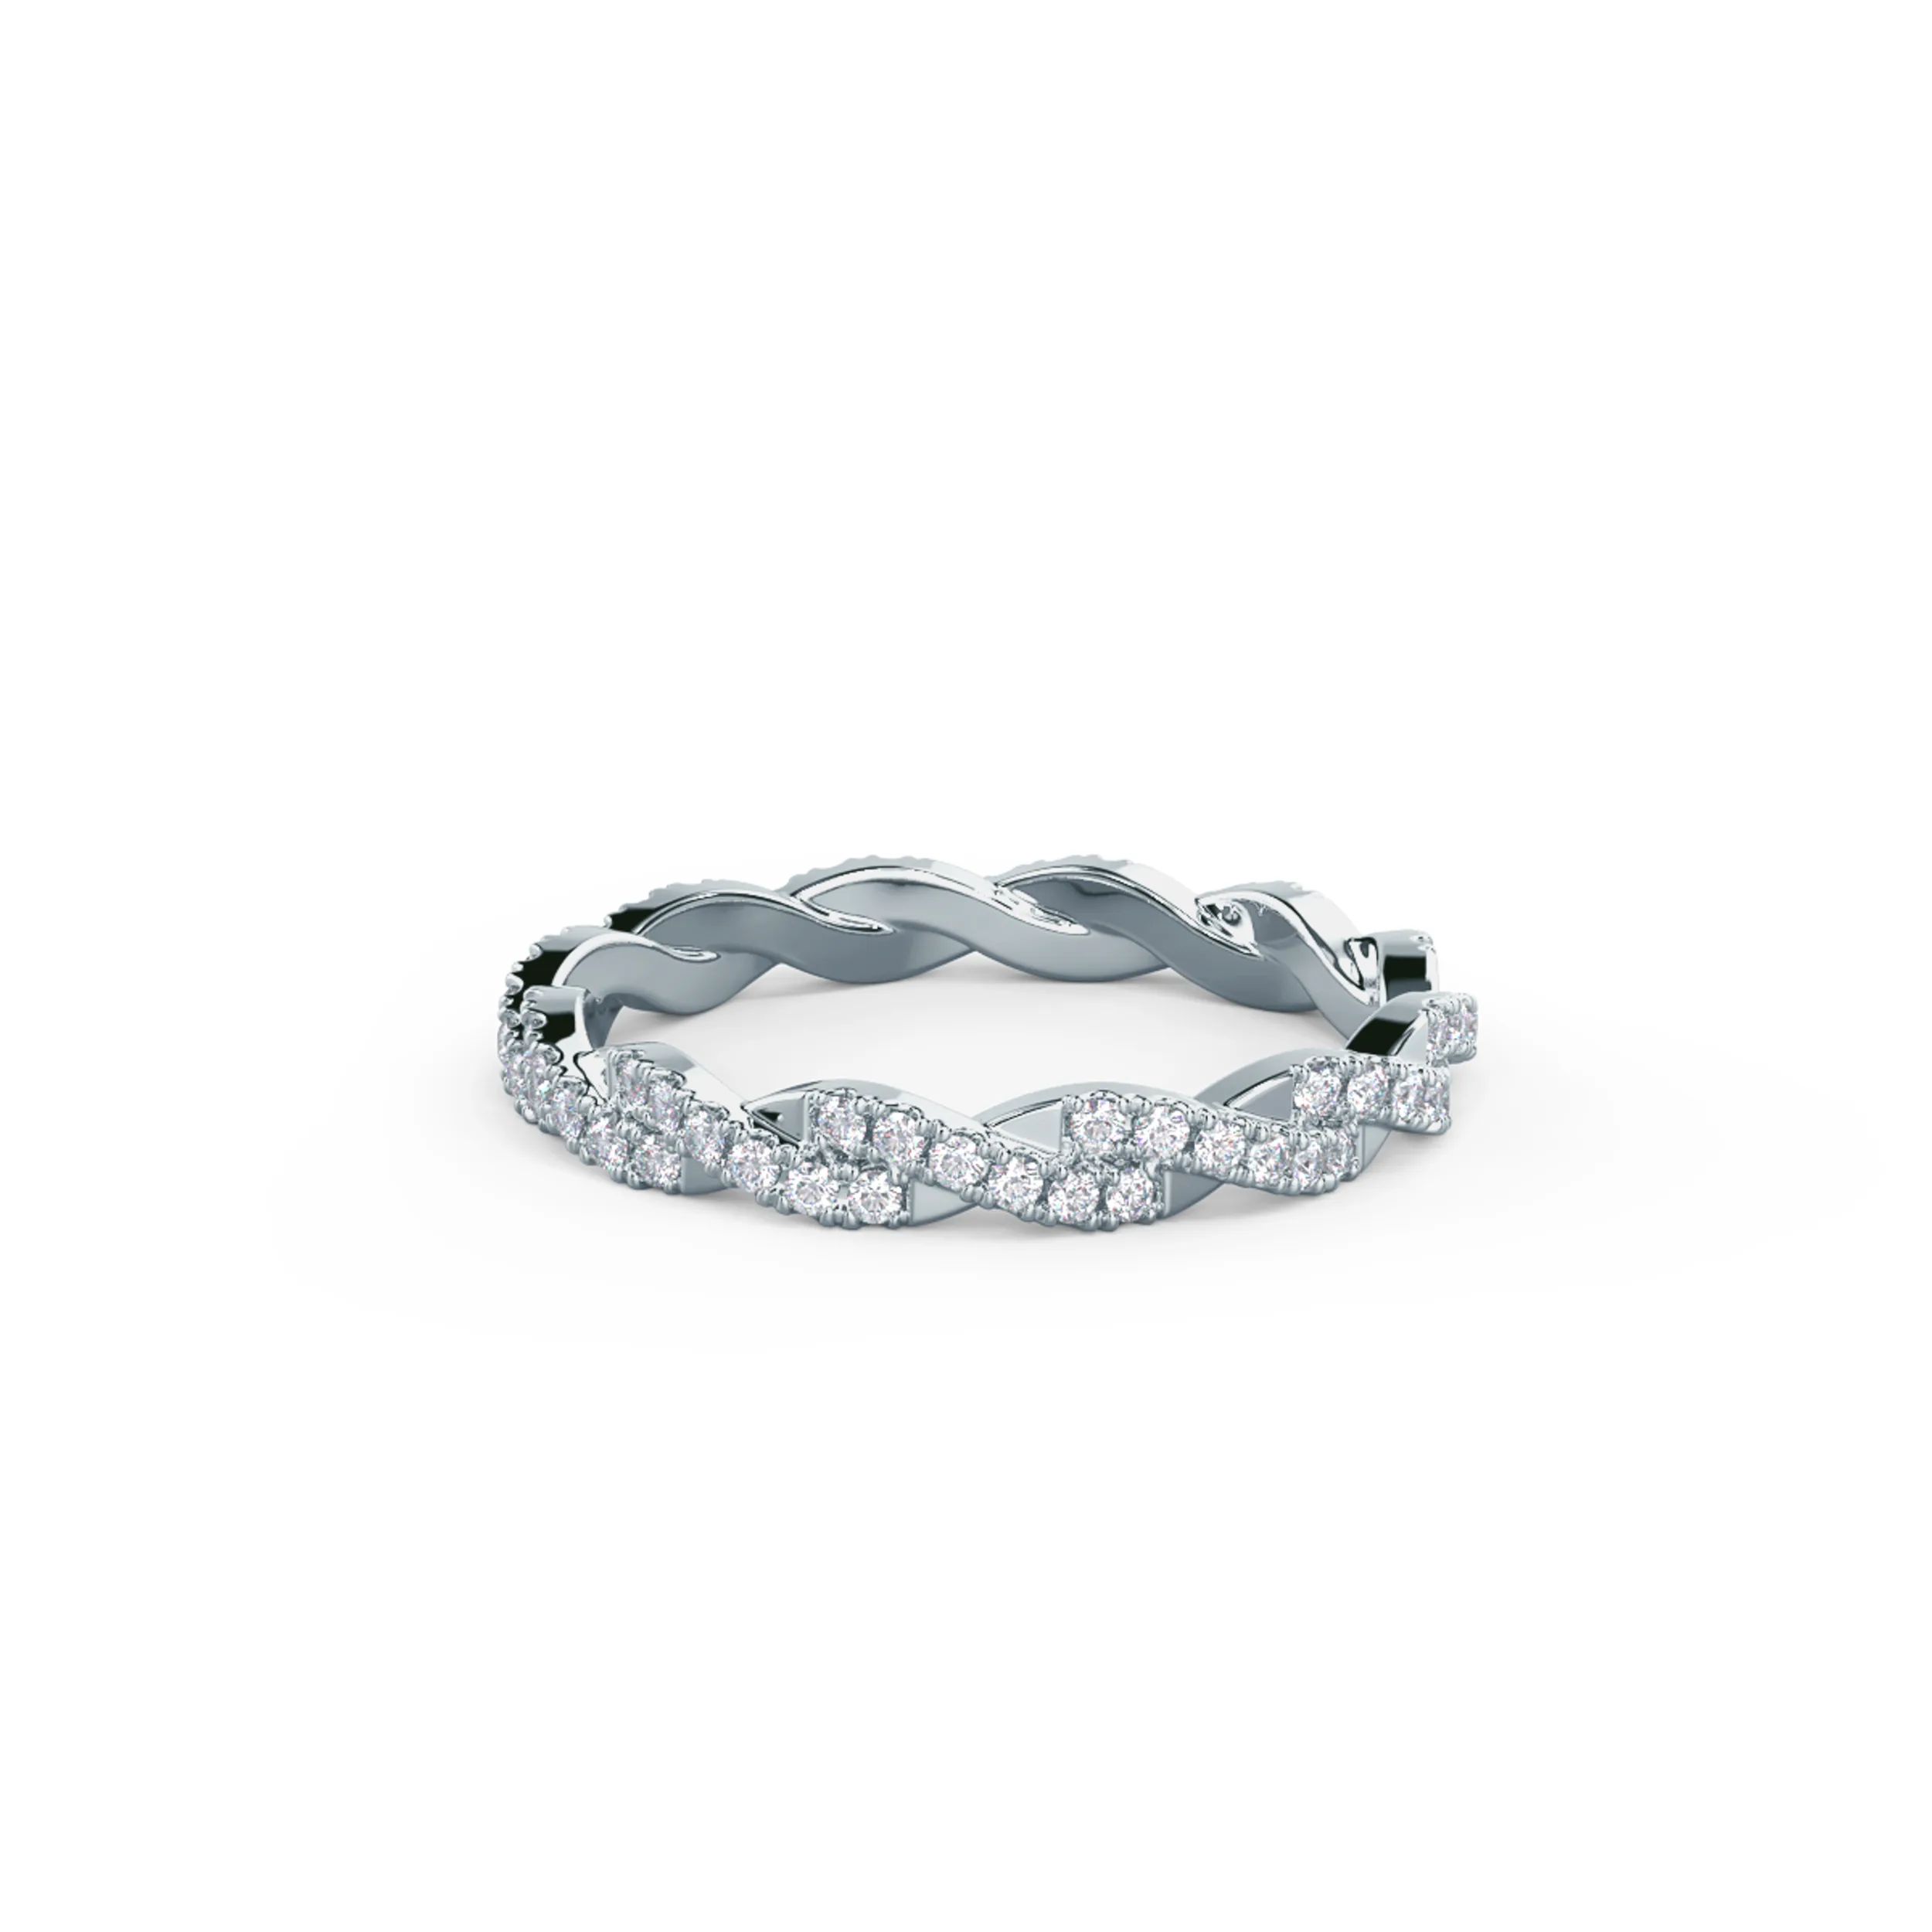 High Quality 0.45 ct Round Brilliant Lab Diamonds set in 18k White Gold Infinity Twist Full Eternity Band (Main View)